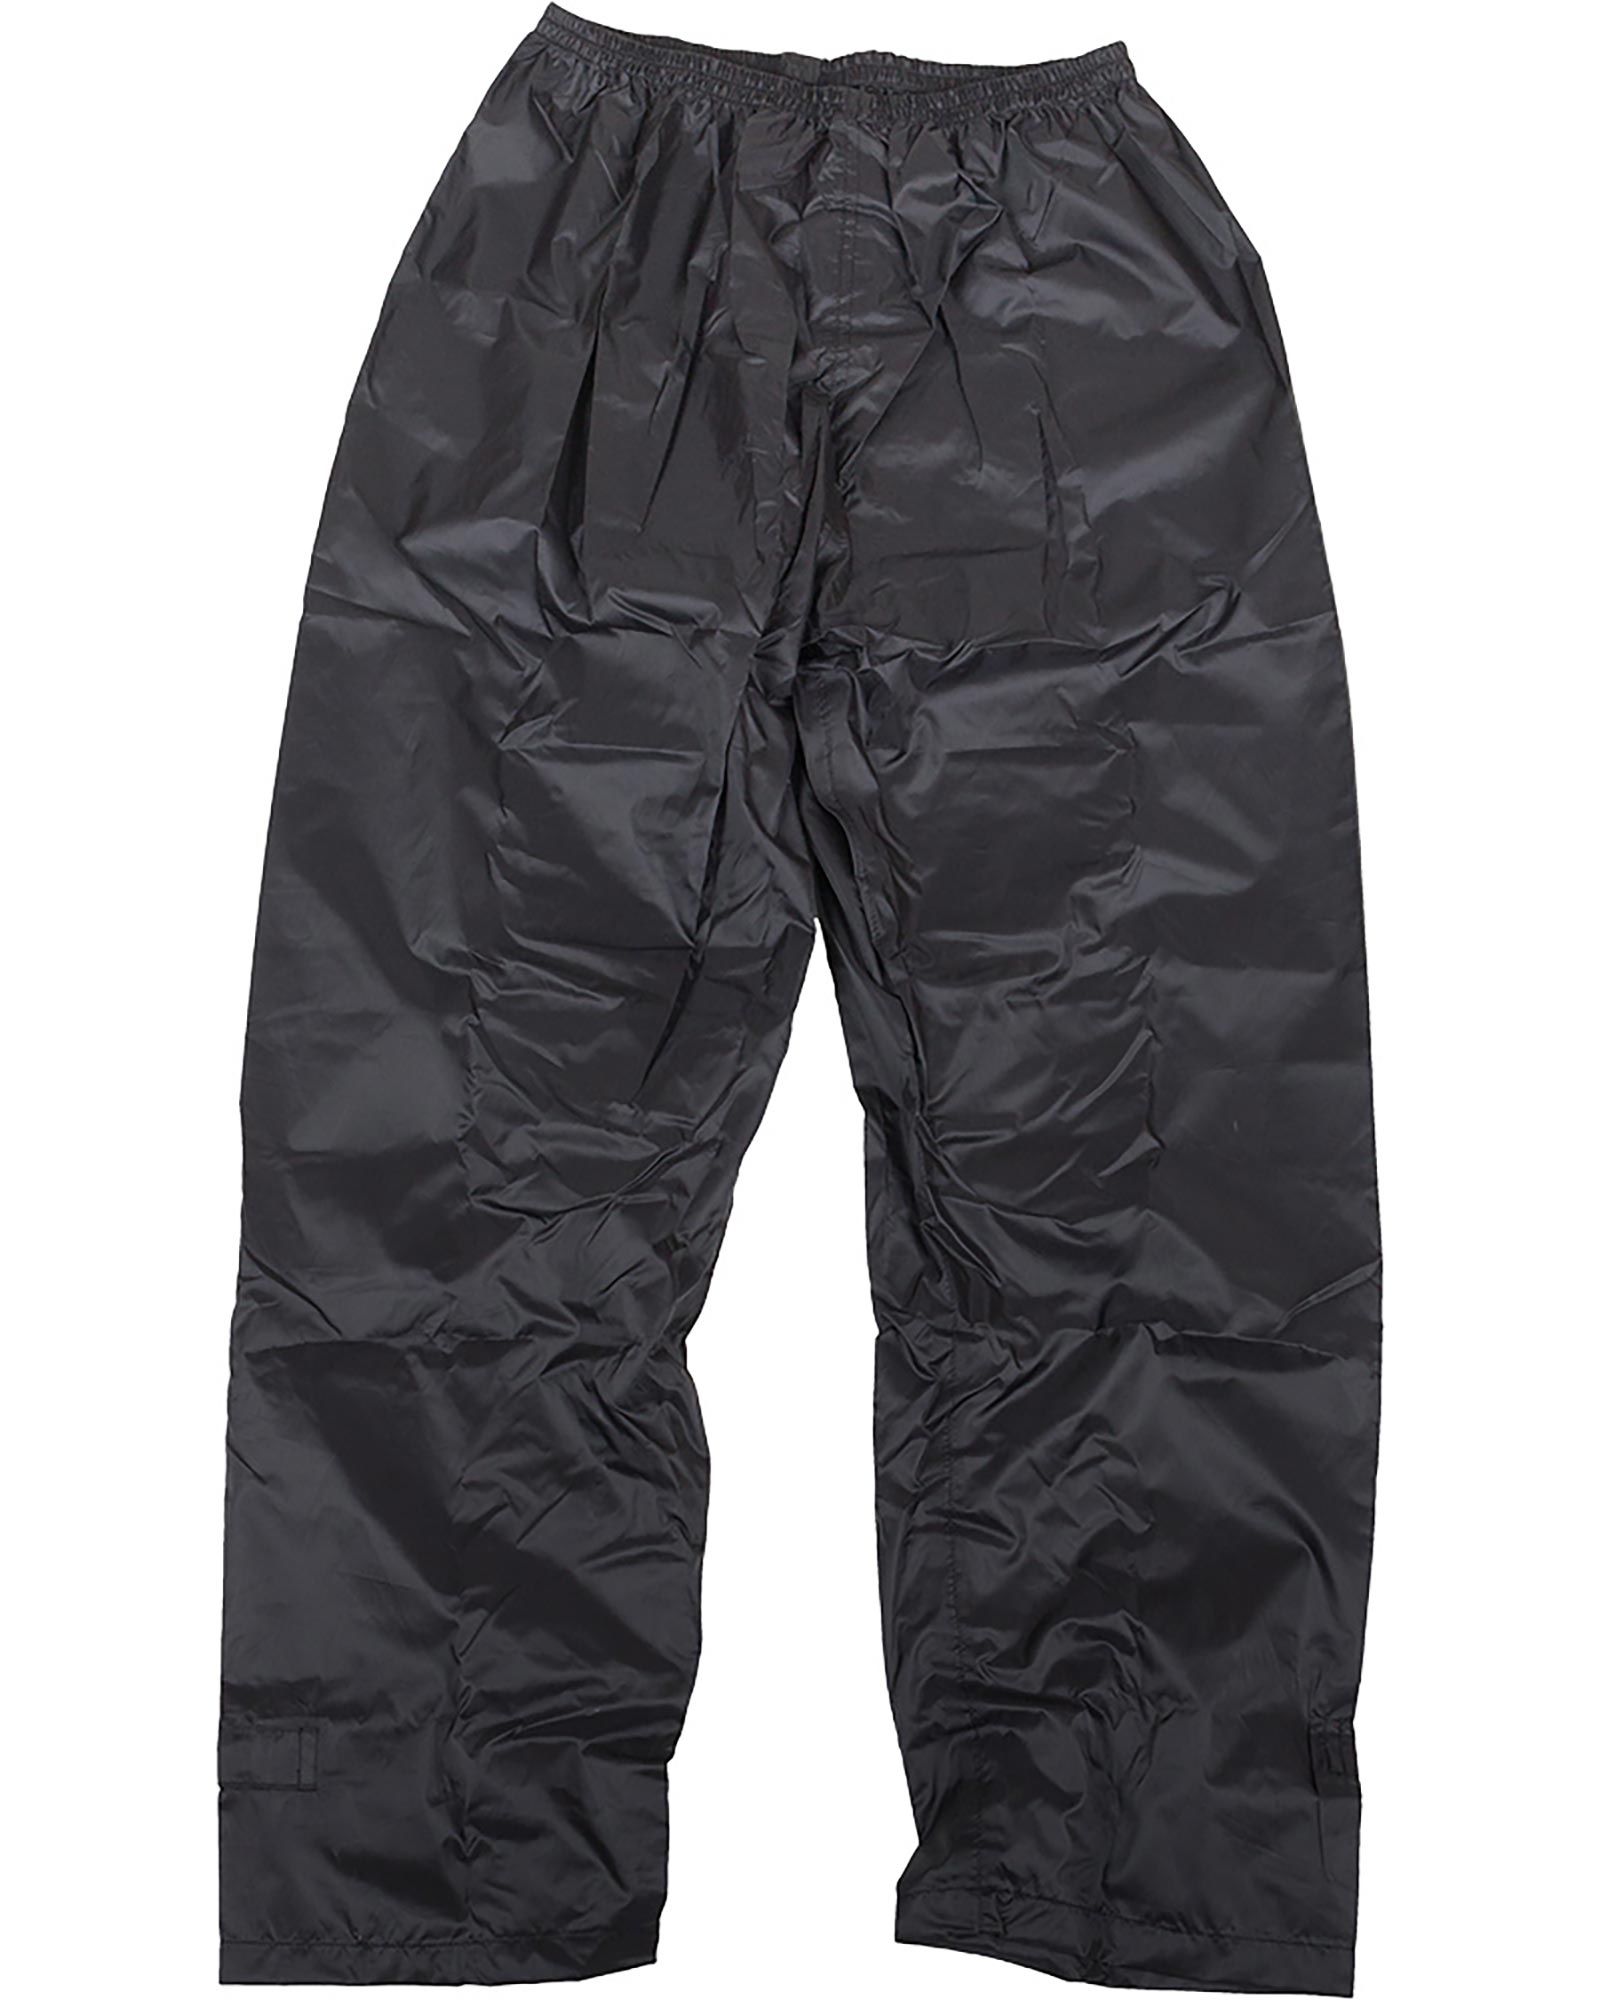 Target Dry Mac in a Sac Adult Packable Waterproof Overtrousers - black XL